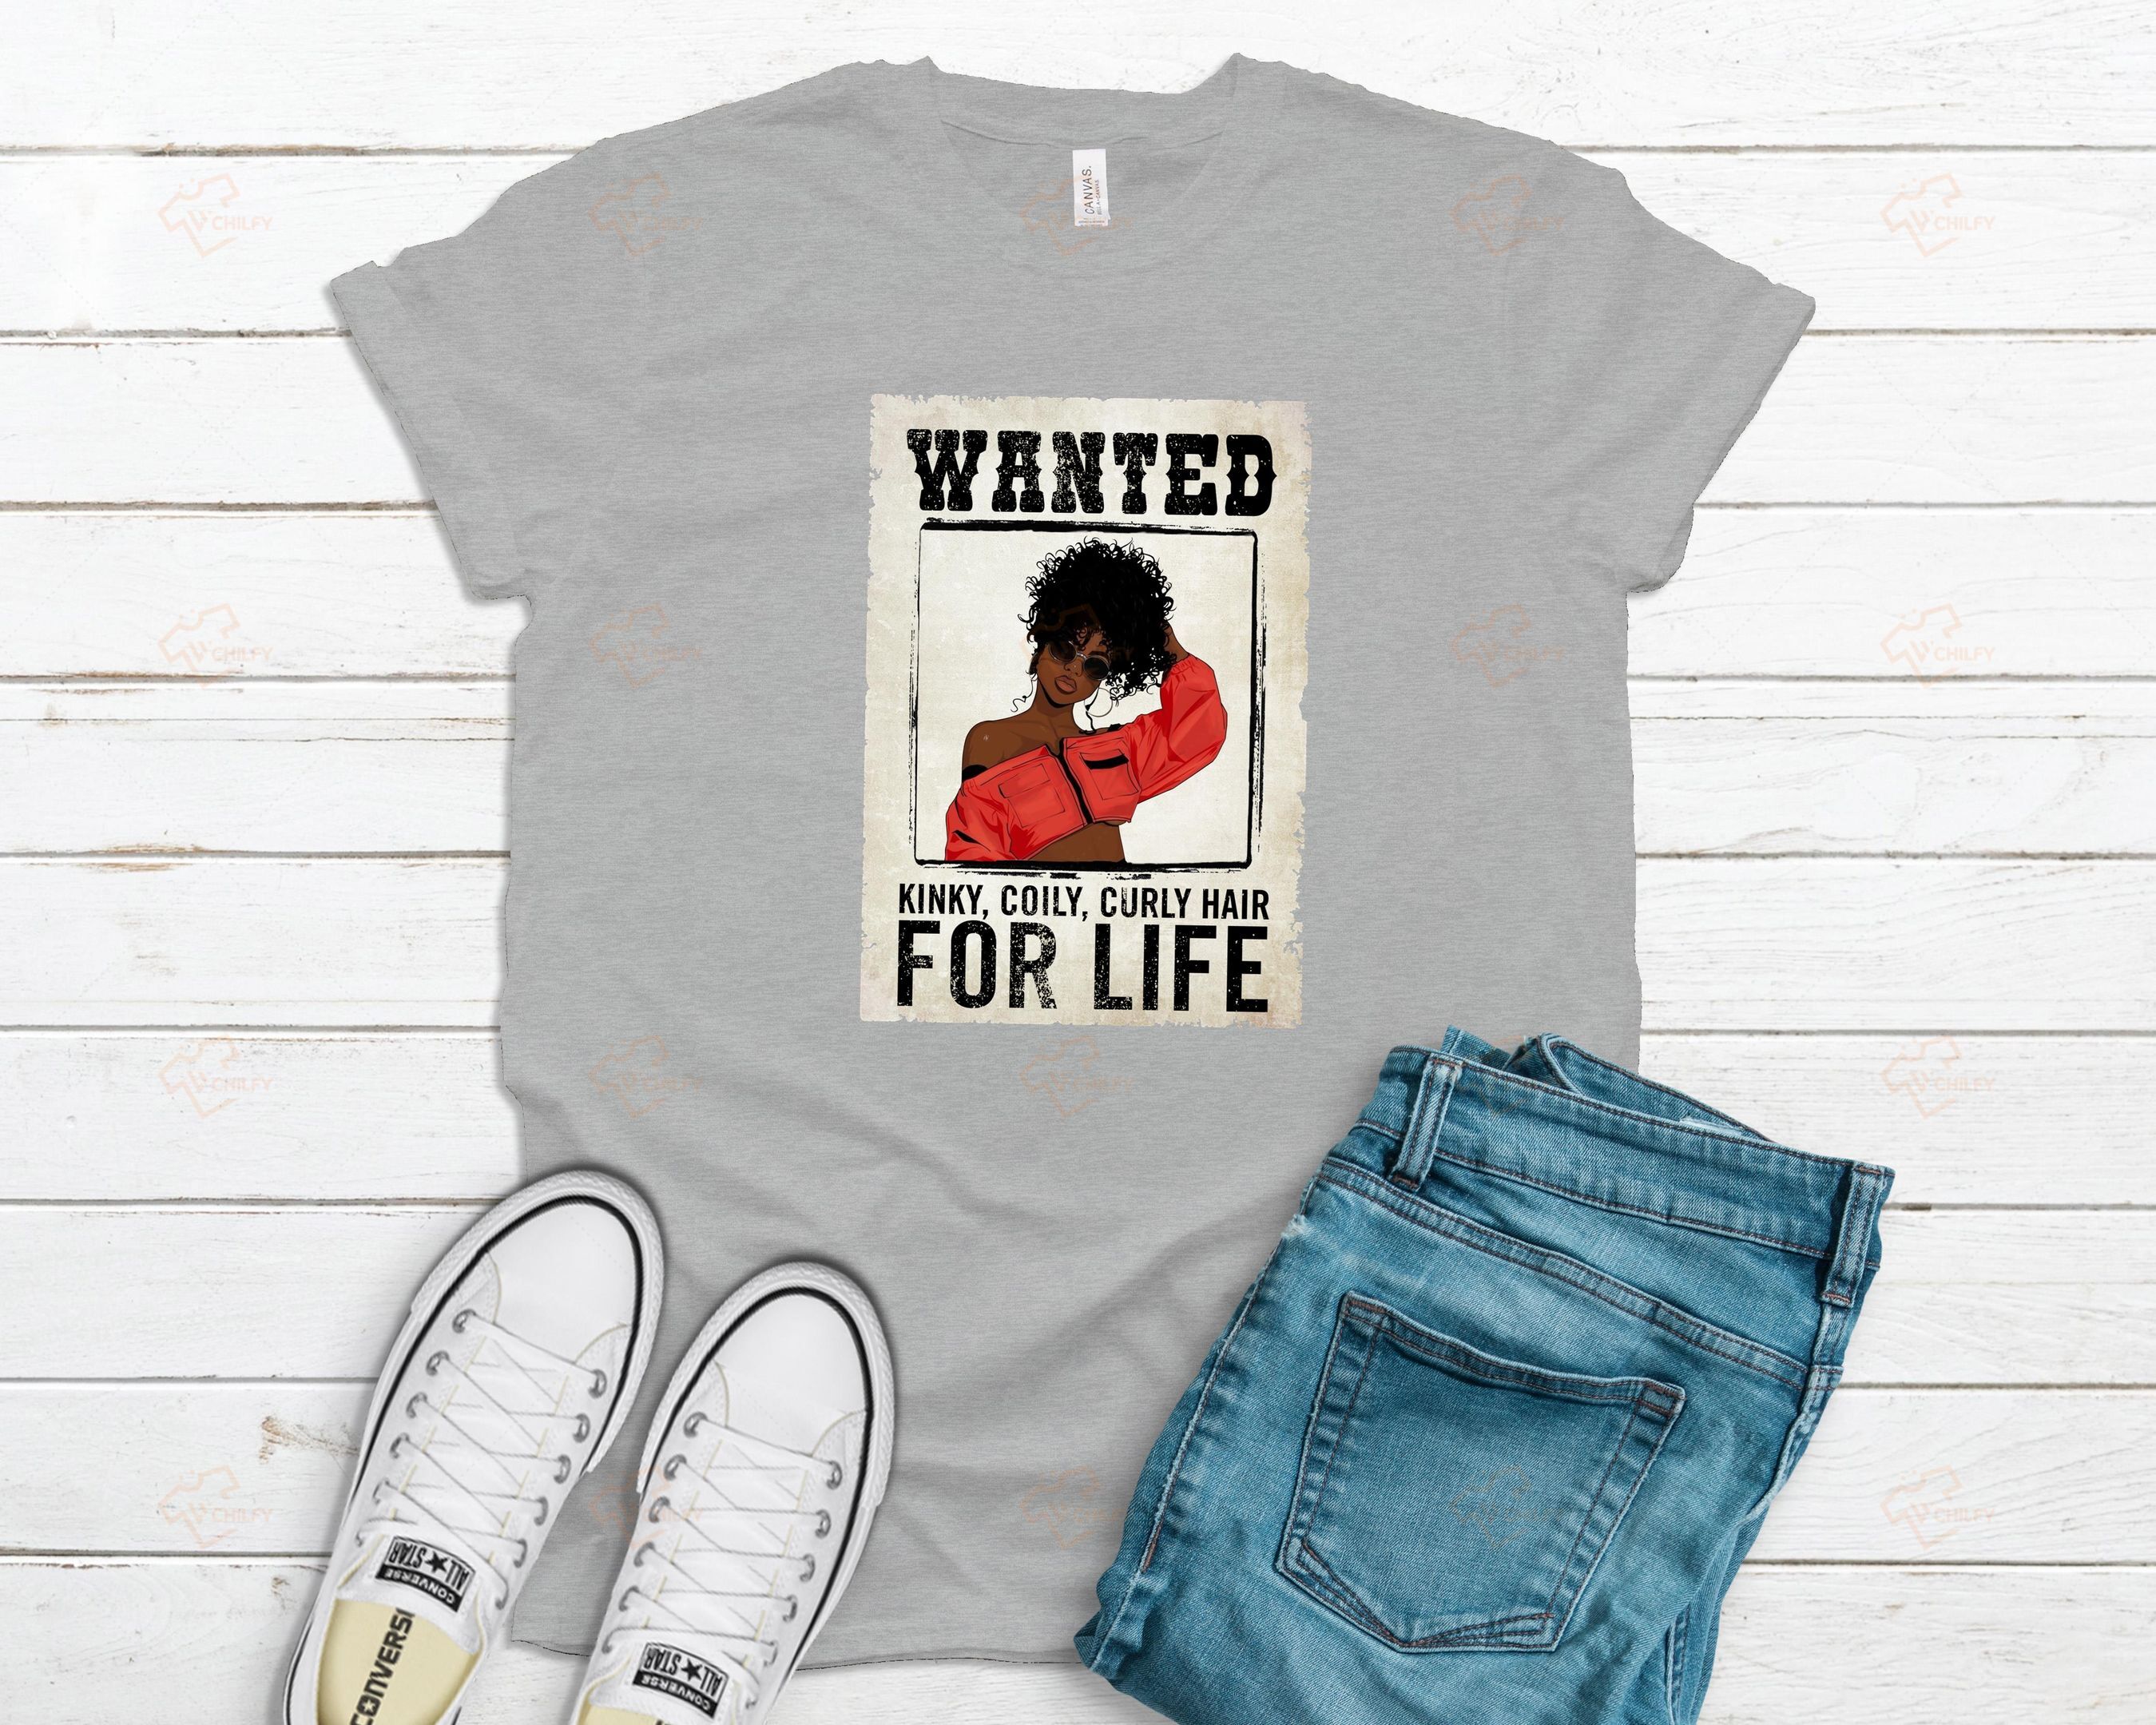 Wanted Coily Curly Hair For Life shirt, Afro girl shirt, Black girl shirt